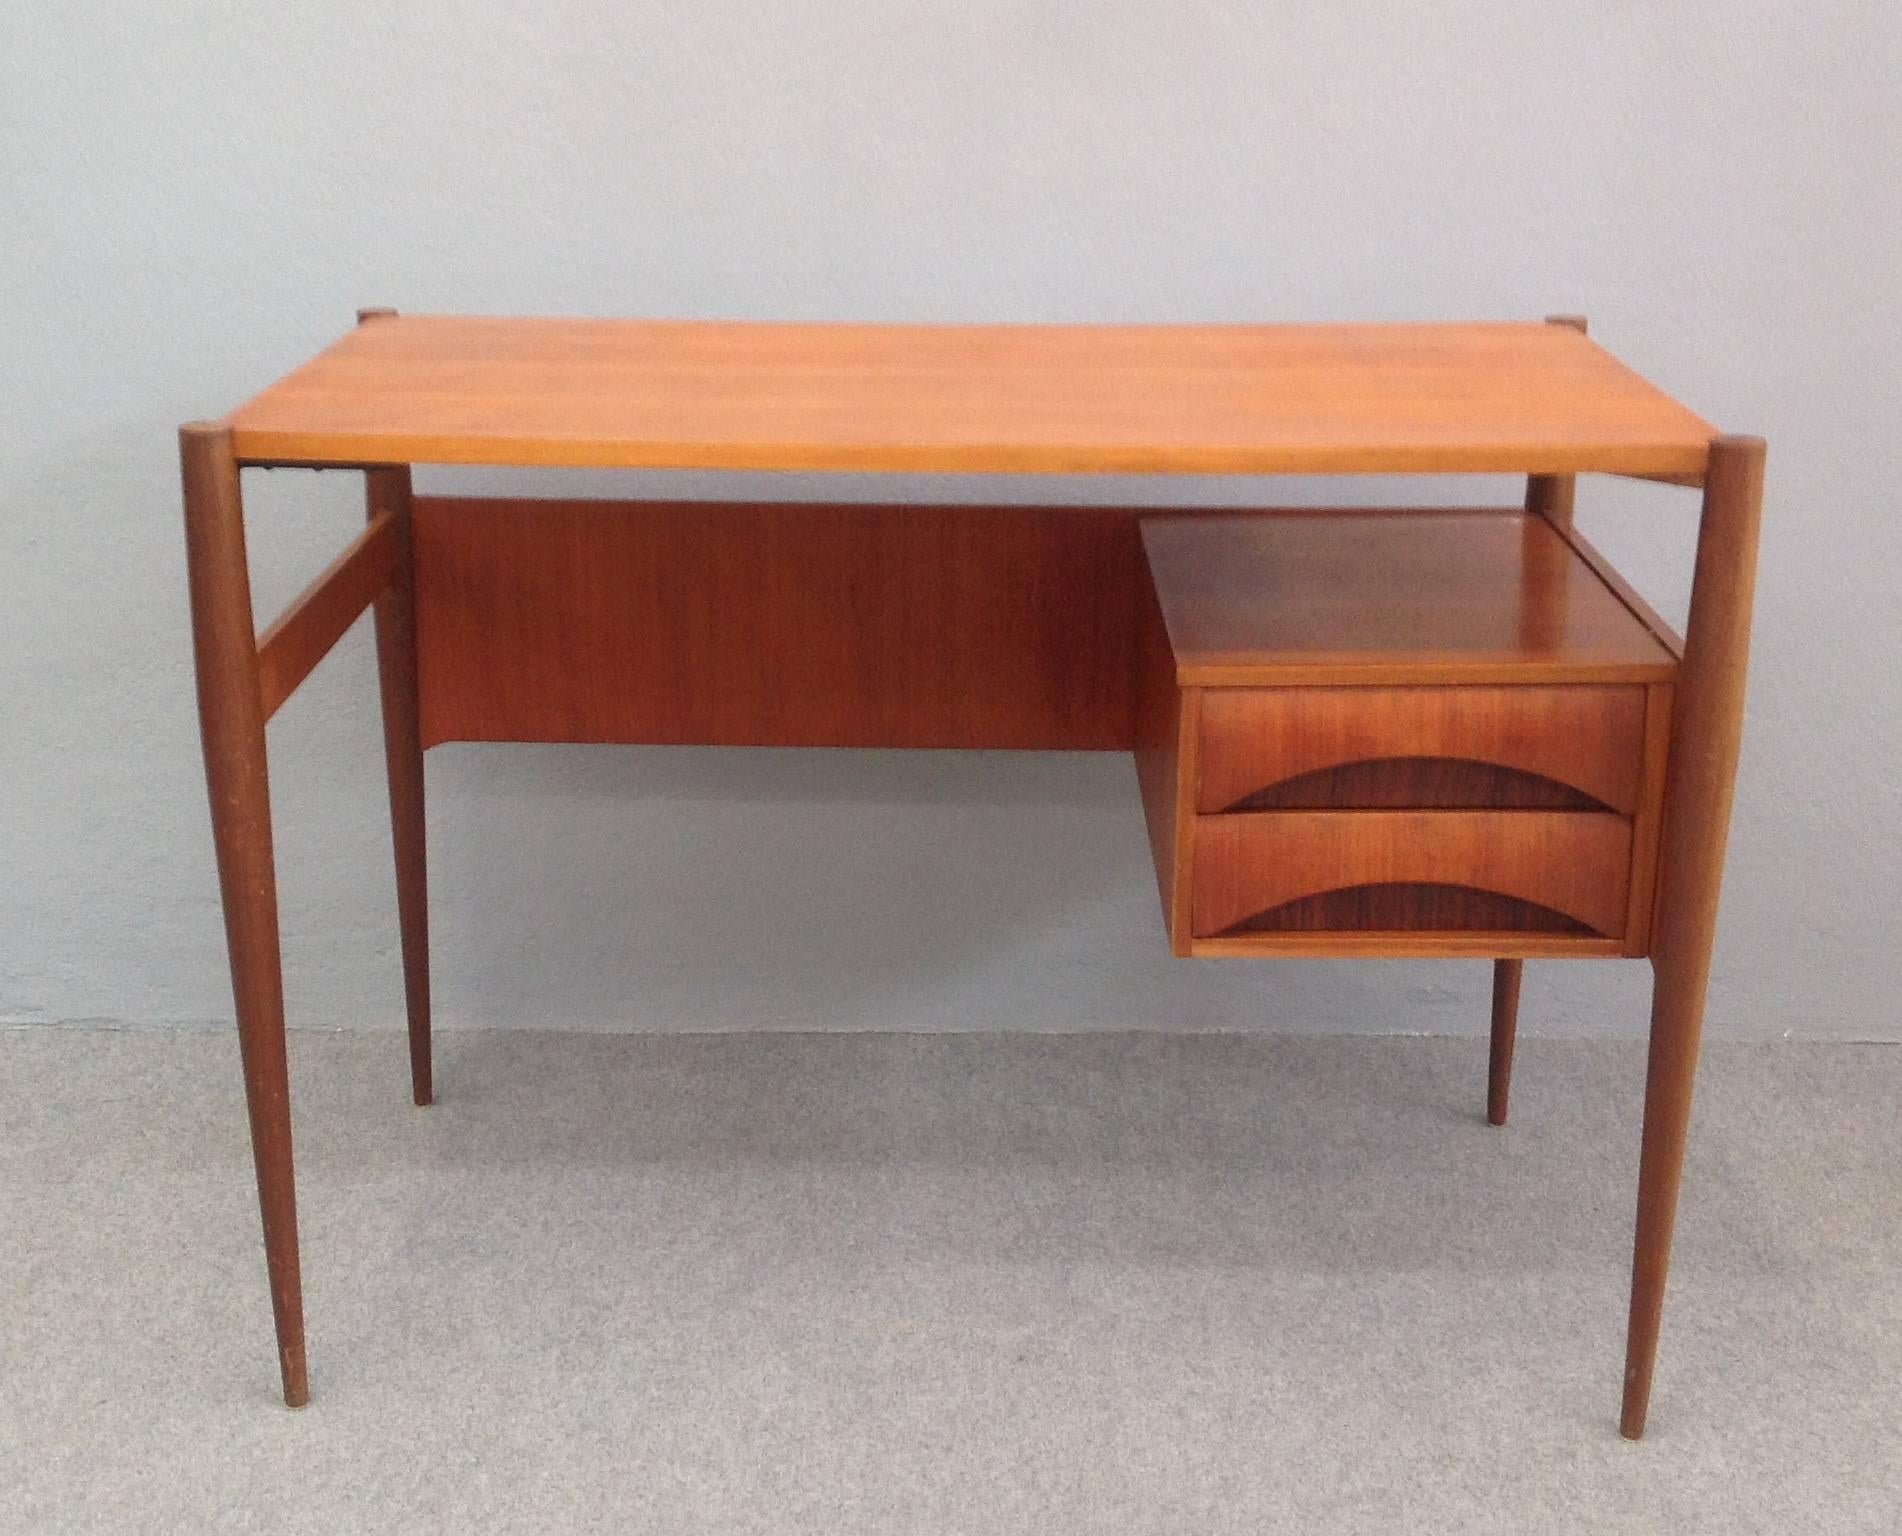 Two flanking drawer desk, finished on all sides and having storage space above drawers.